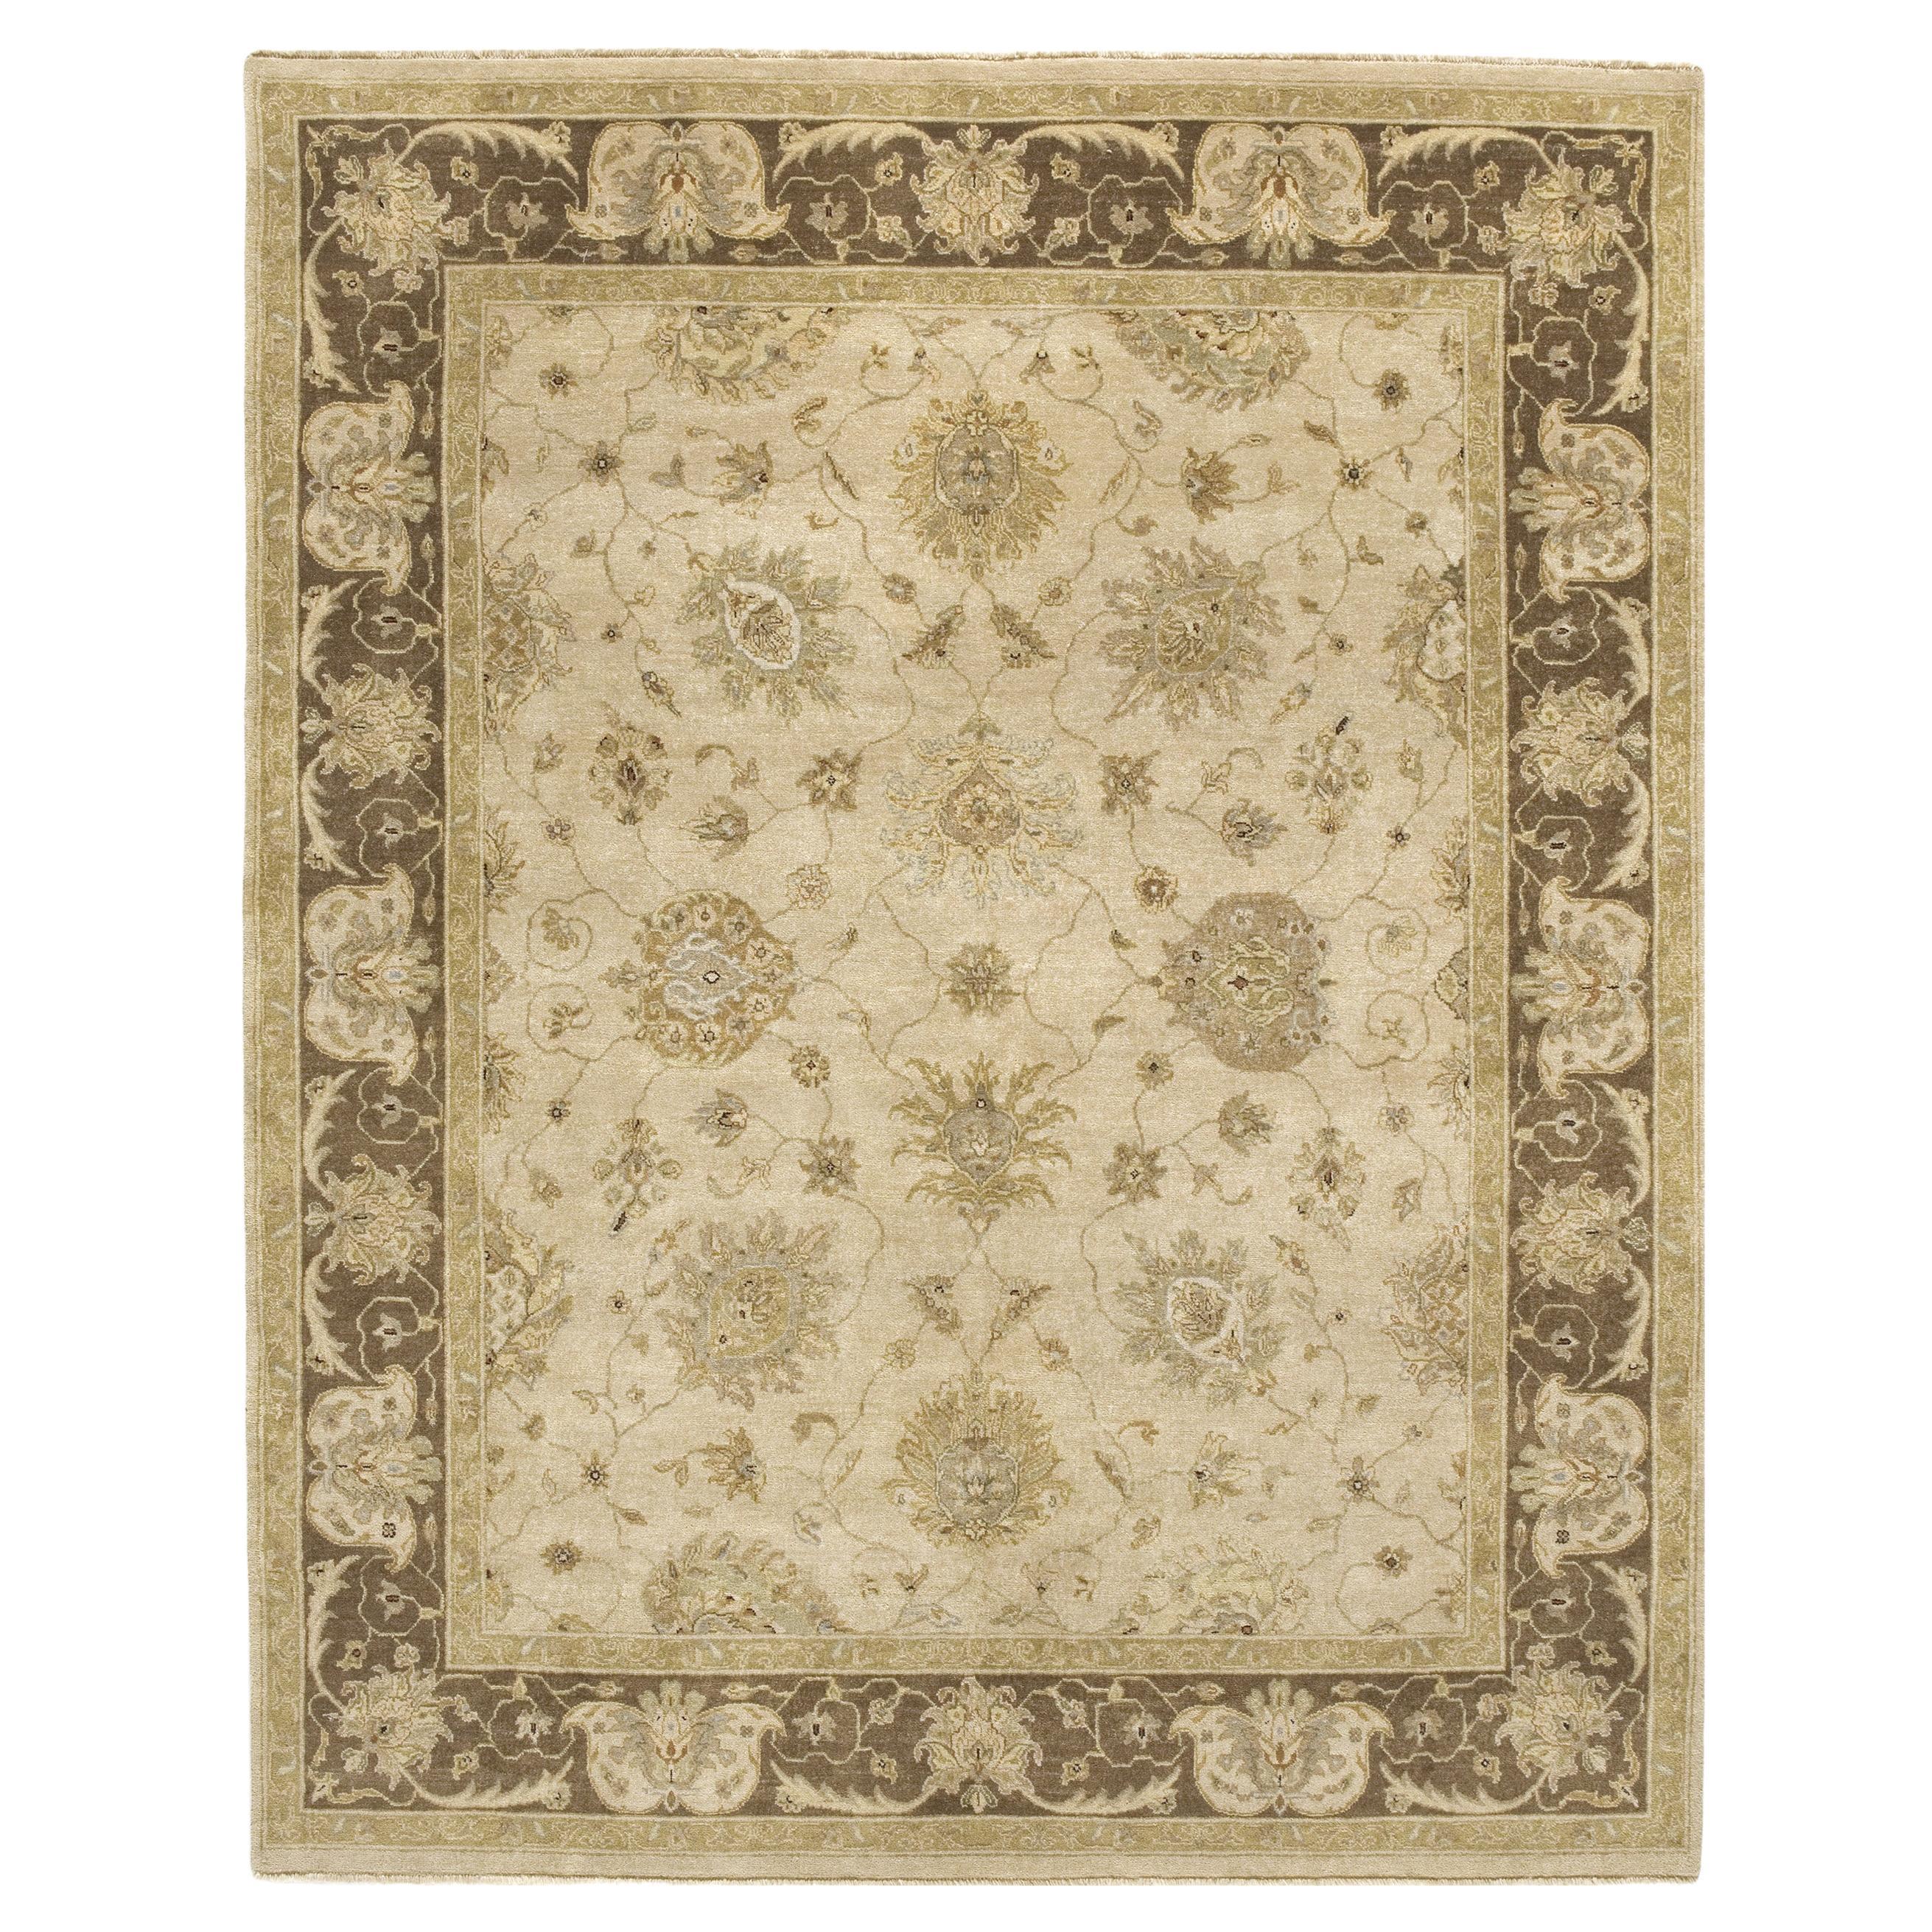 Luxury Traditional Hand-Knotted Amritsar Mogul Beige/Brown 12x24 Rug